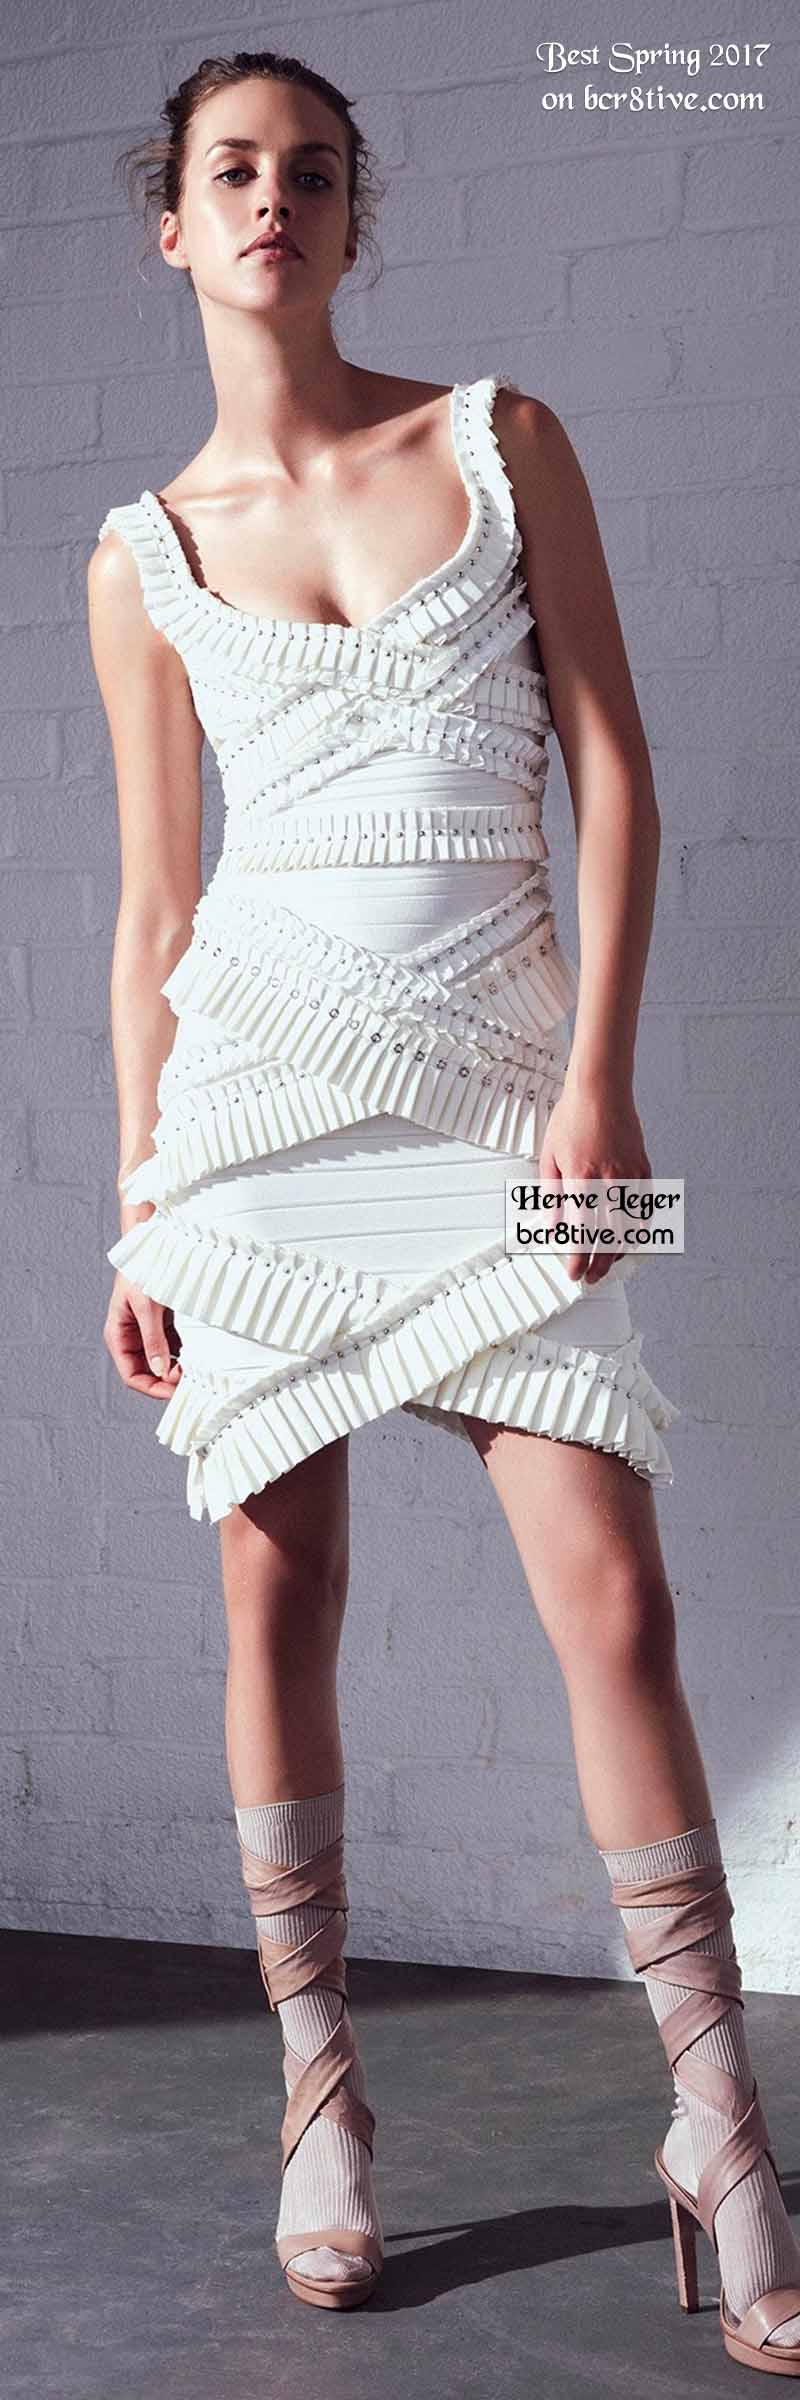 Herve Leger - The Best Looks from New York Fashion Week Spring 2017